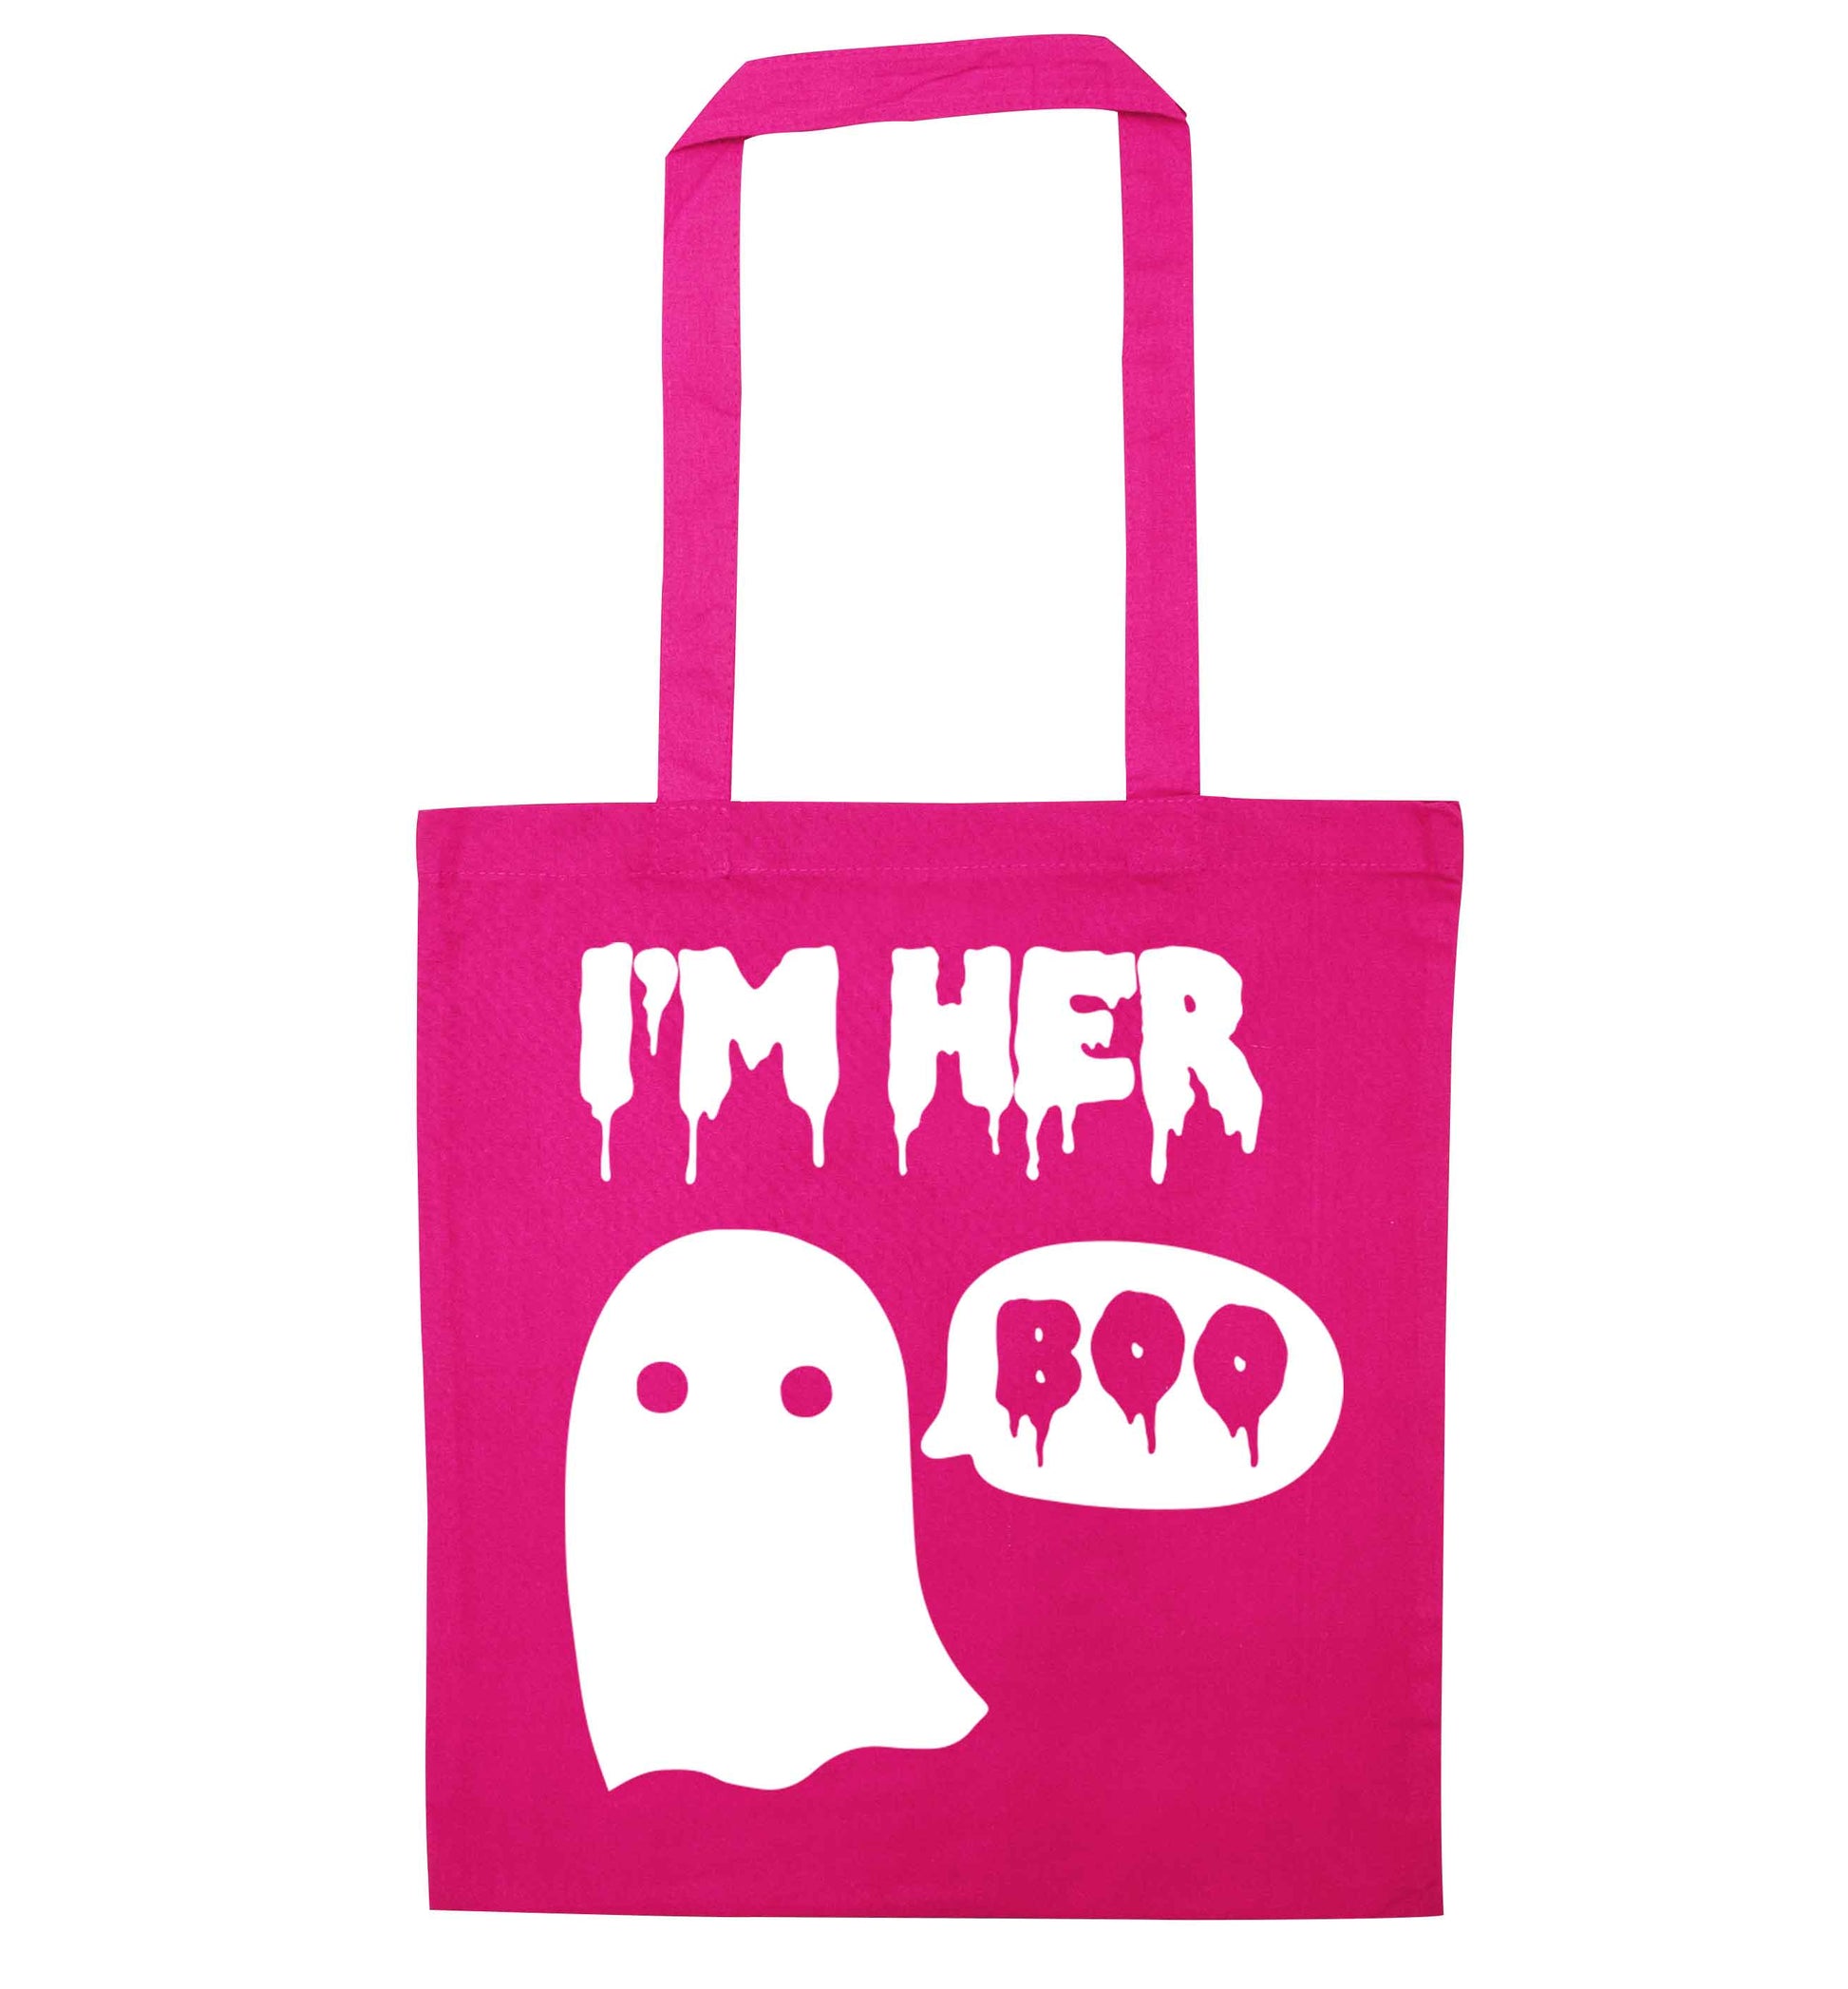 I'm her boo pink tote bag